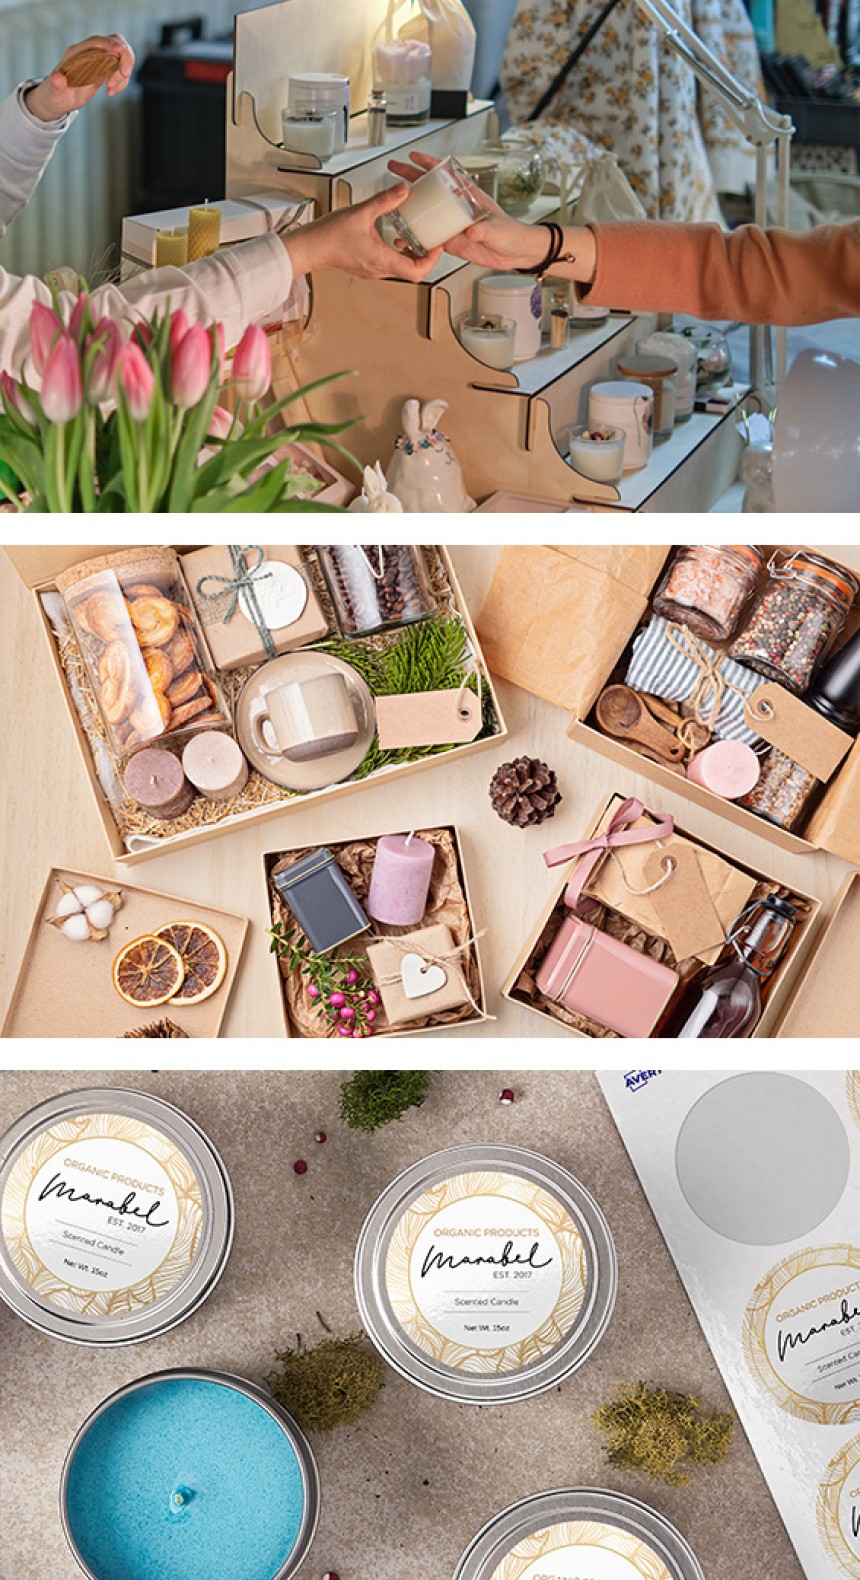 Image 1: Woman handing a candle over to a customer at a market. Image 2: Gift boxes of candles. Image 3: Avery Round labels on homemade candles